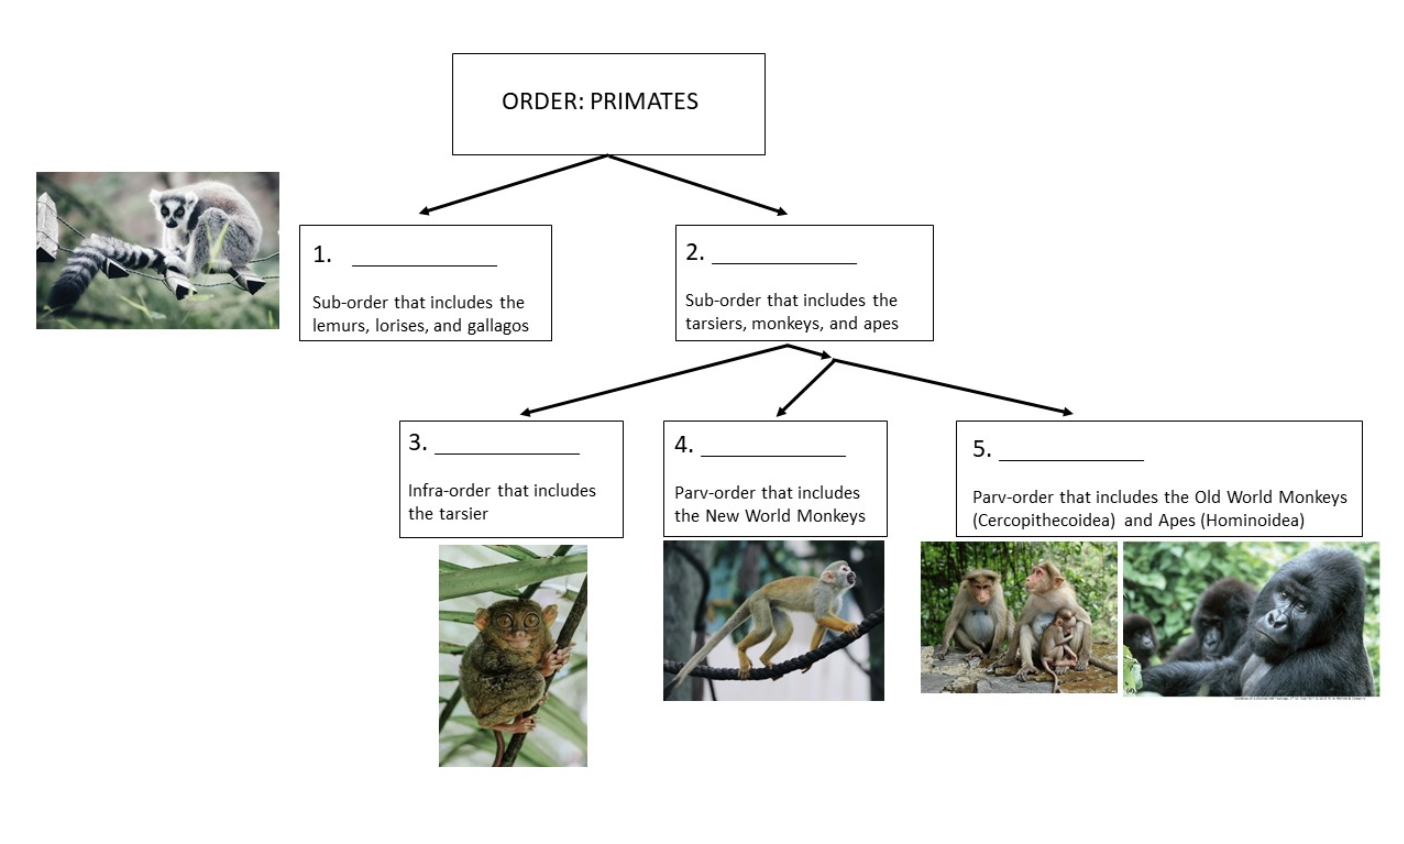 ORDER: PRIMATES 1. 2. Sub-order that includes the lemurs, lorises, and gallagos Sub-order that includes the tarsiers, monkeys